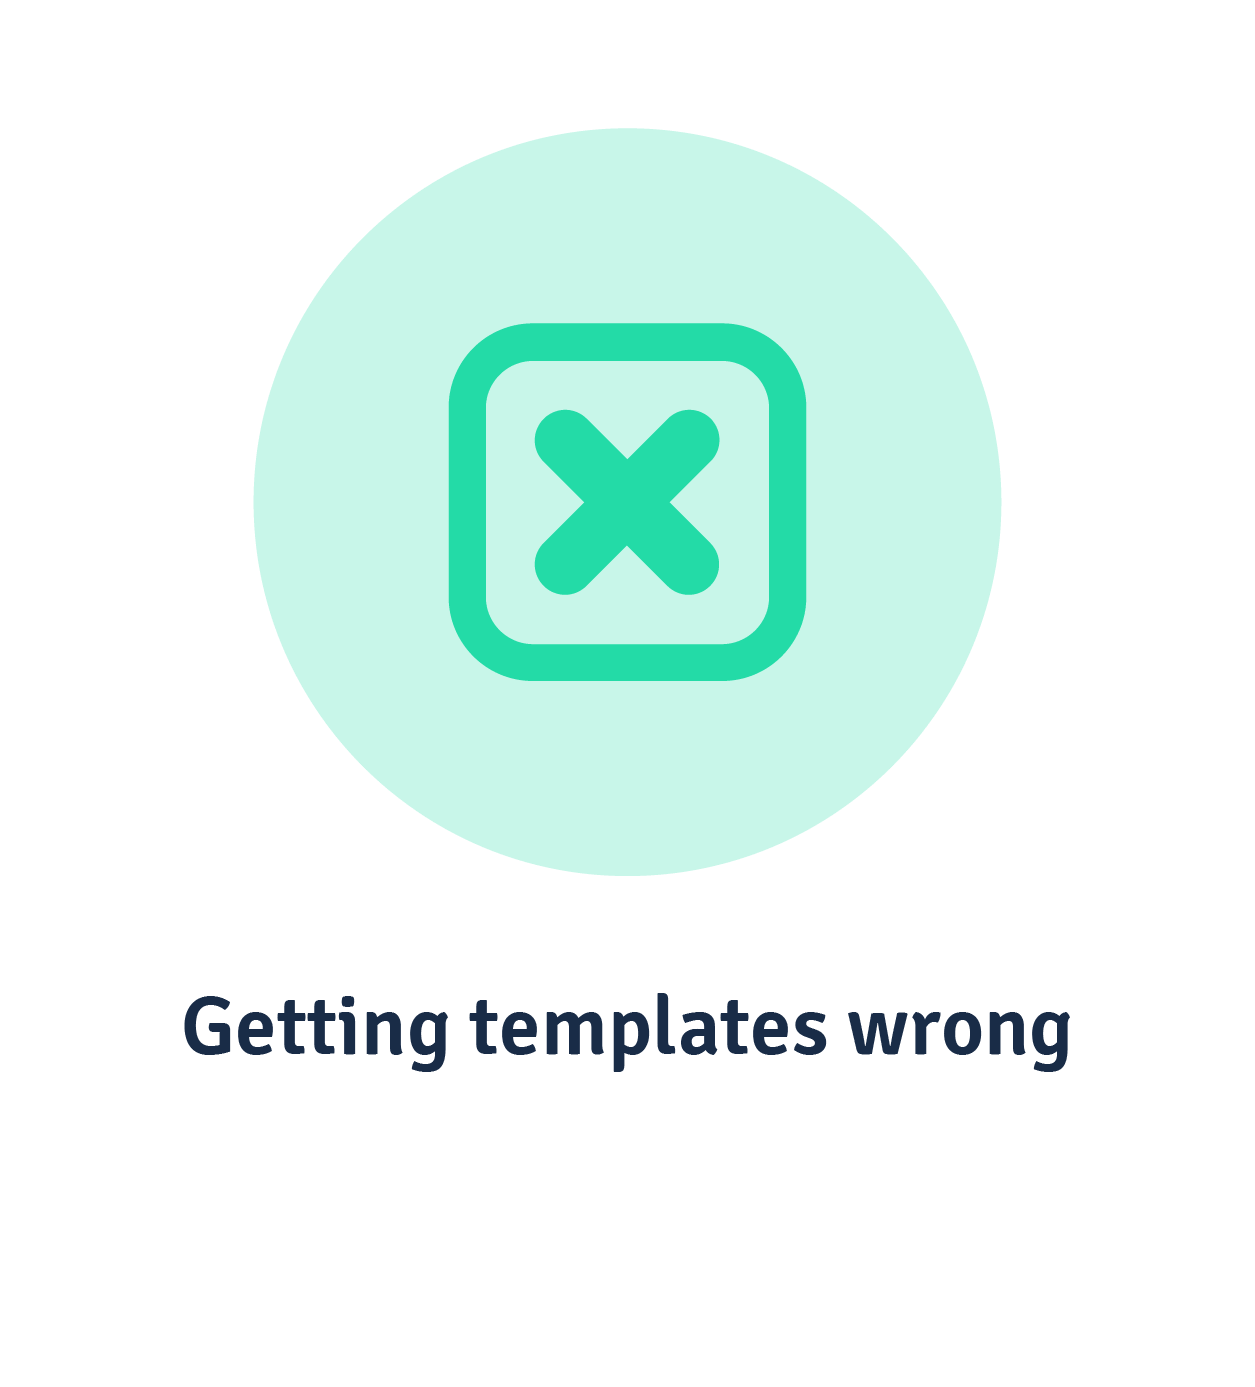 Where organisations go wrong with workforce planning templates